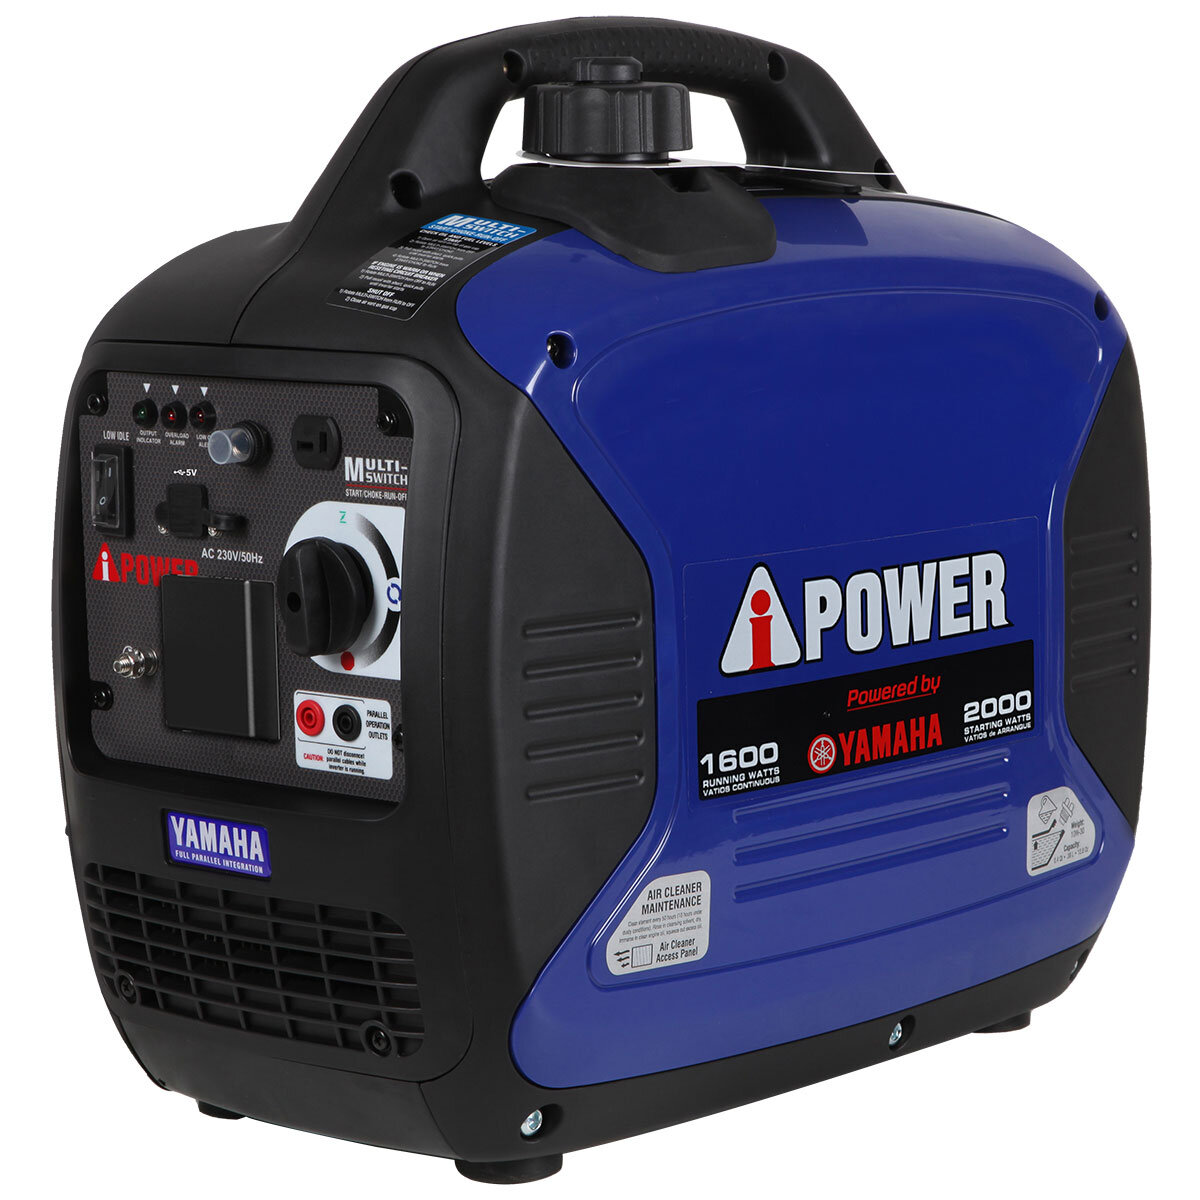 Costco Tri Fuel Generator: The Best Generator for All Your Power Needs